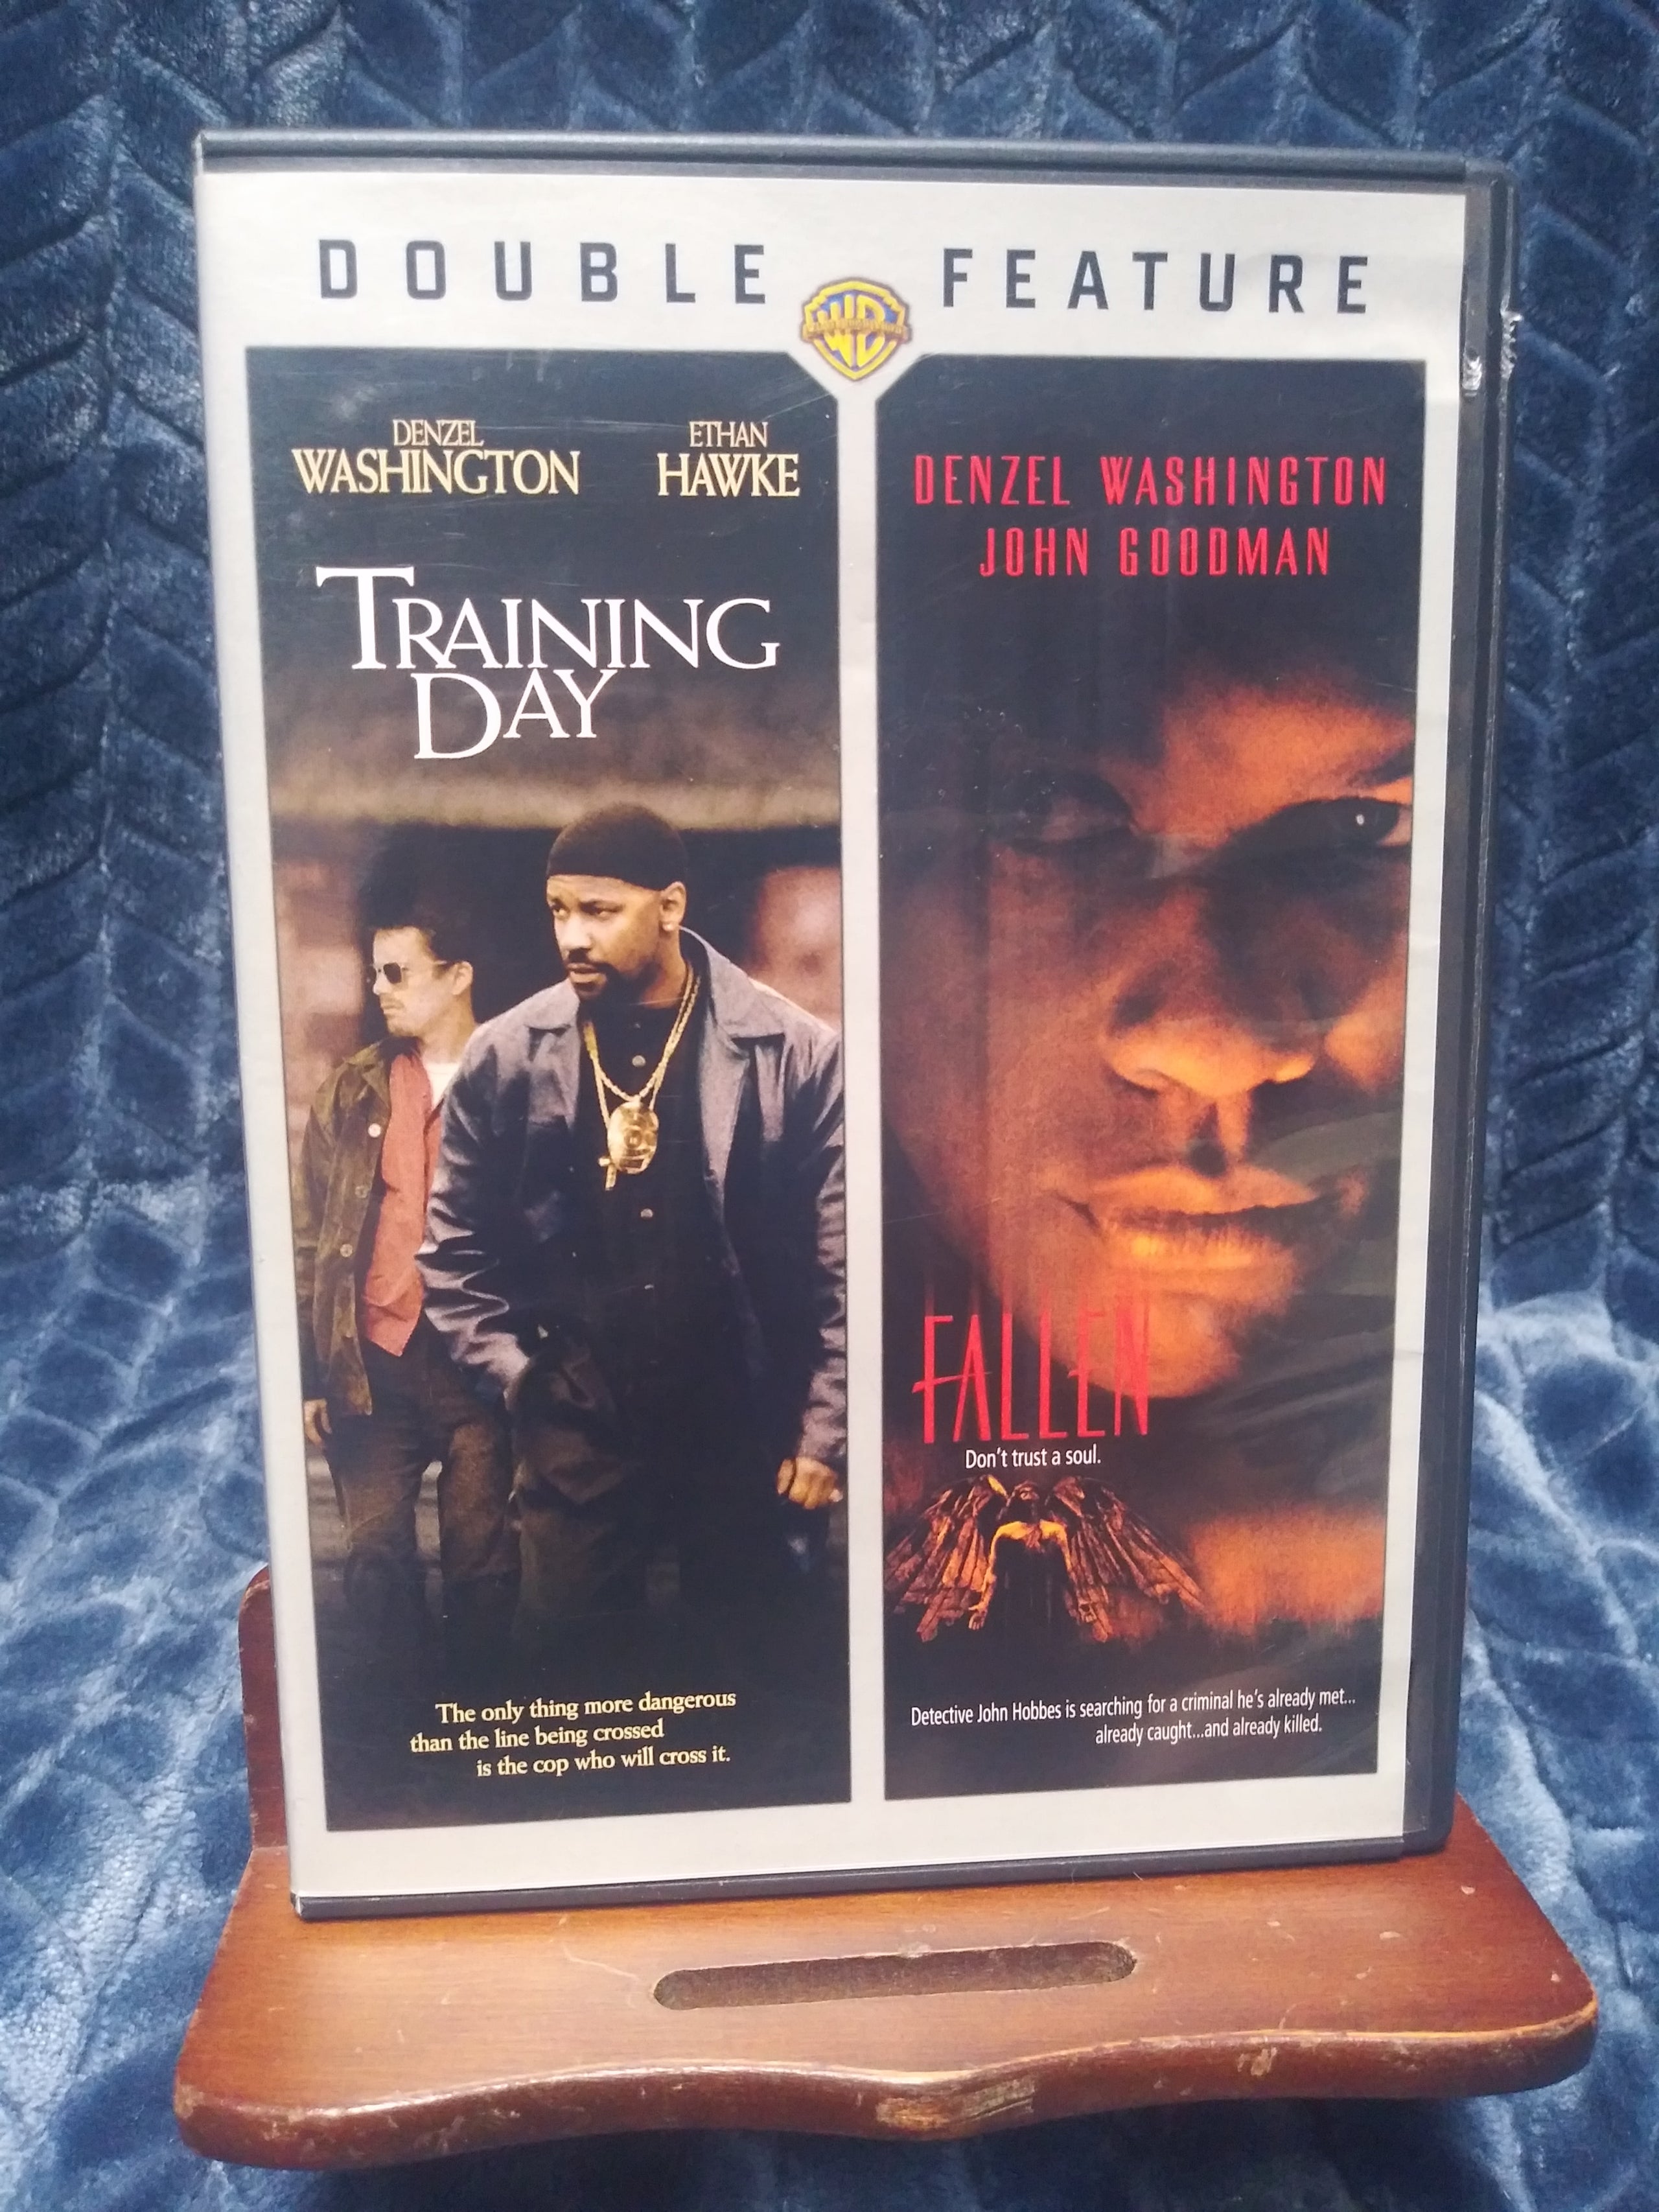 New, Used, and Refurbished DVDs | AbnerRock